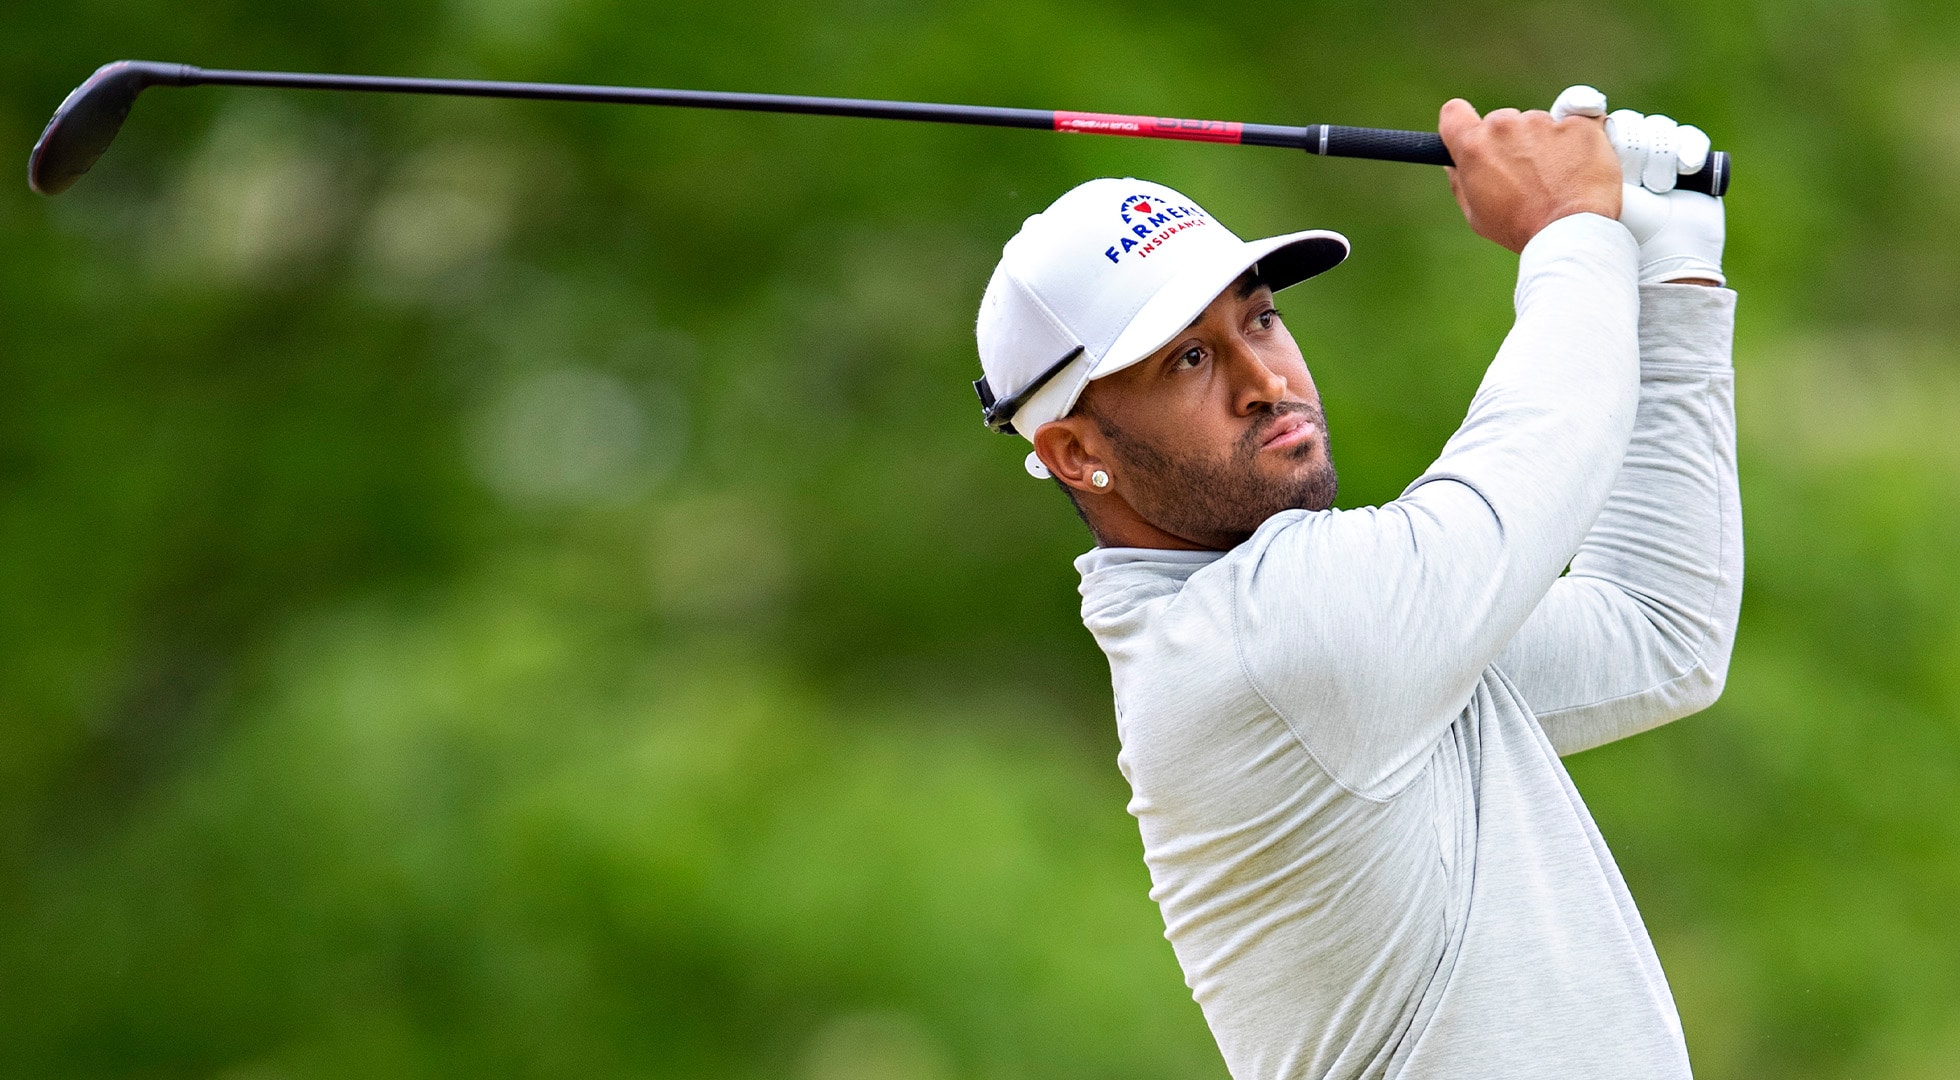 Memorable year for Willie Mack III ends with PGA Tour start in Mayakoba